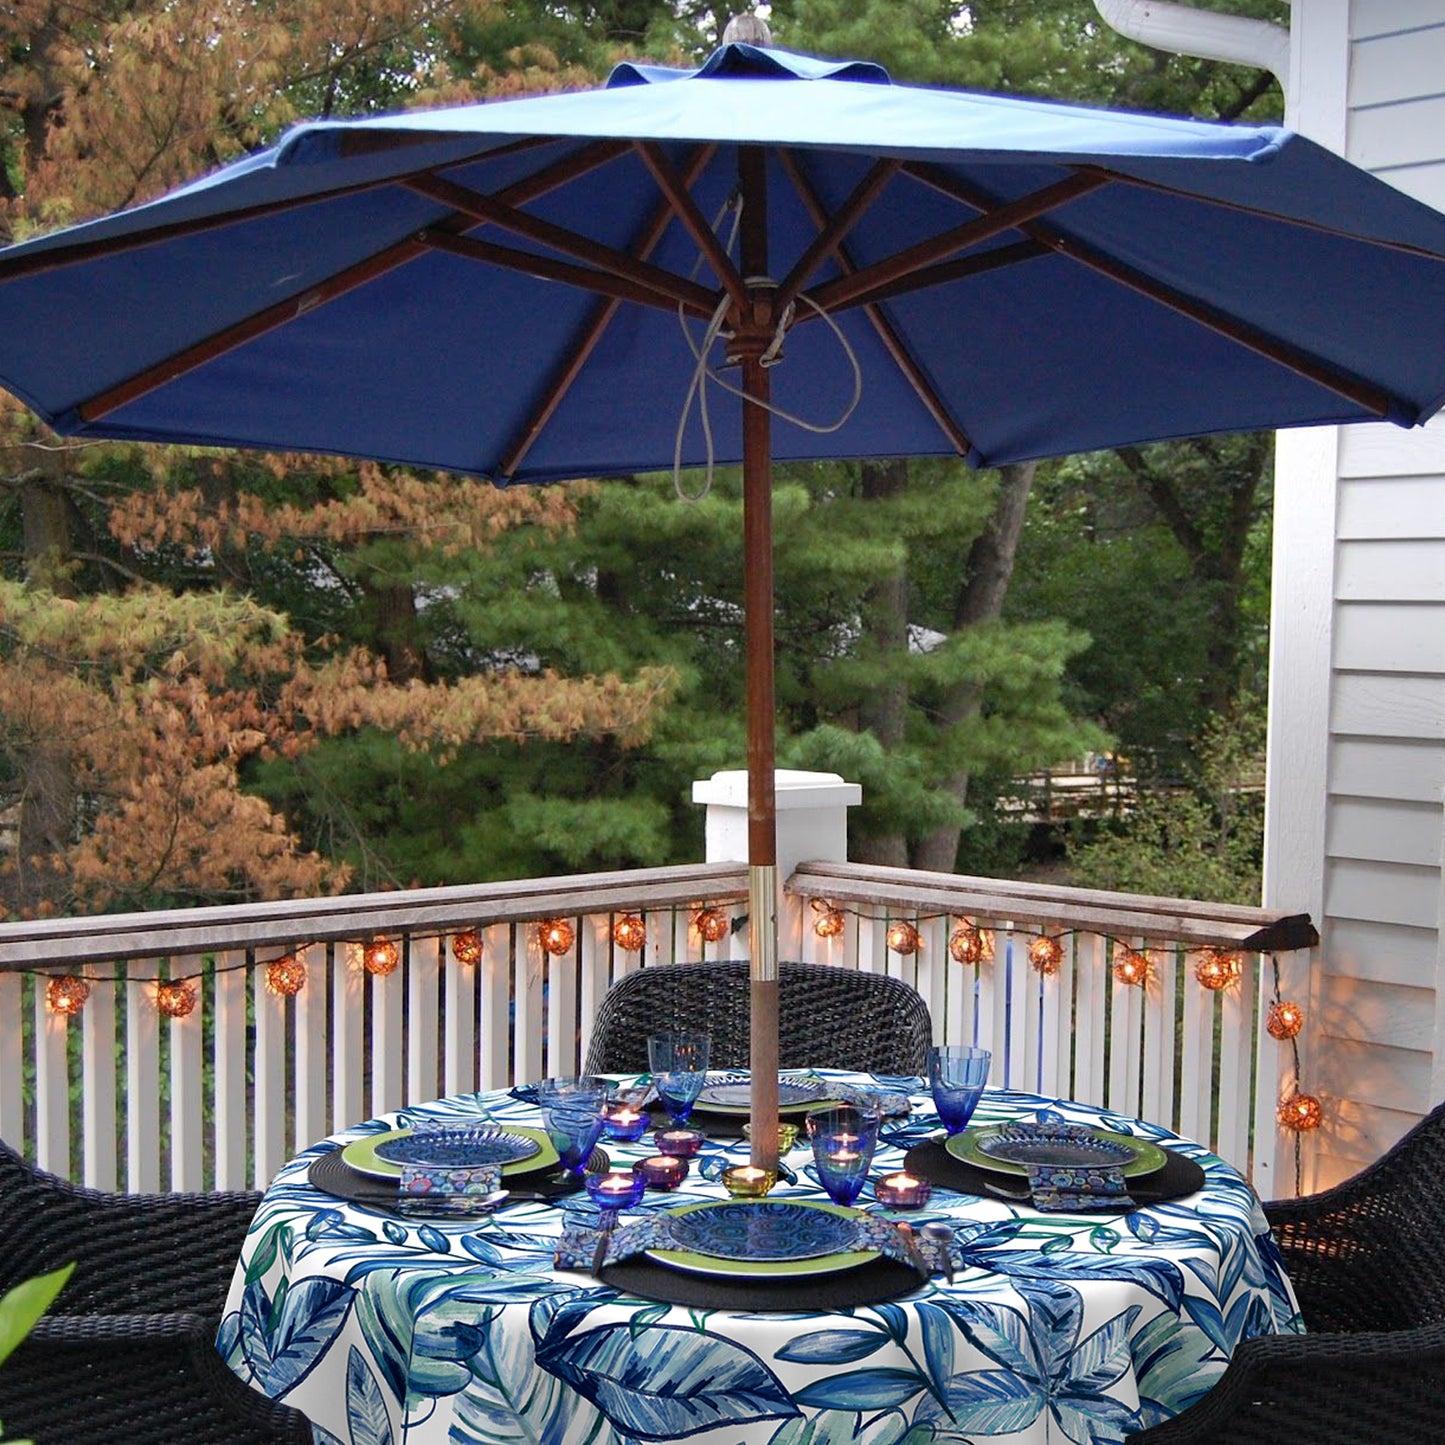 Melody Elephant Outdoor/Indoor Round Tablecloth with Umbrella Hole Zipper, Decorative Circular Table Cover for Home Garden, 60 Inch, Leaves Ink Blue